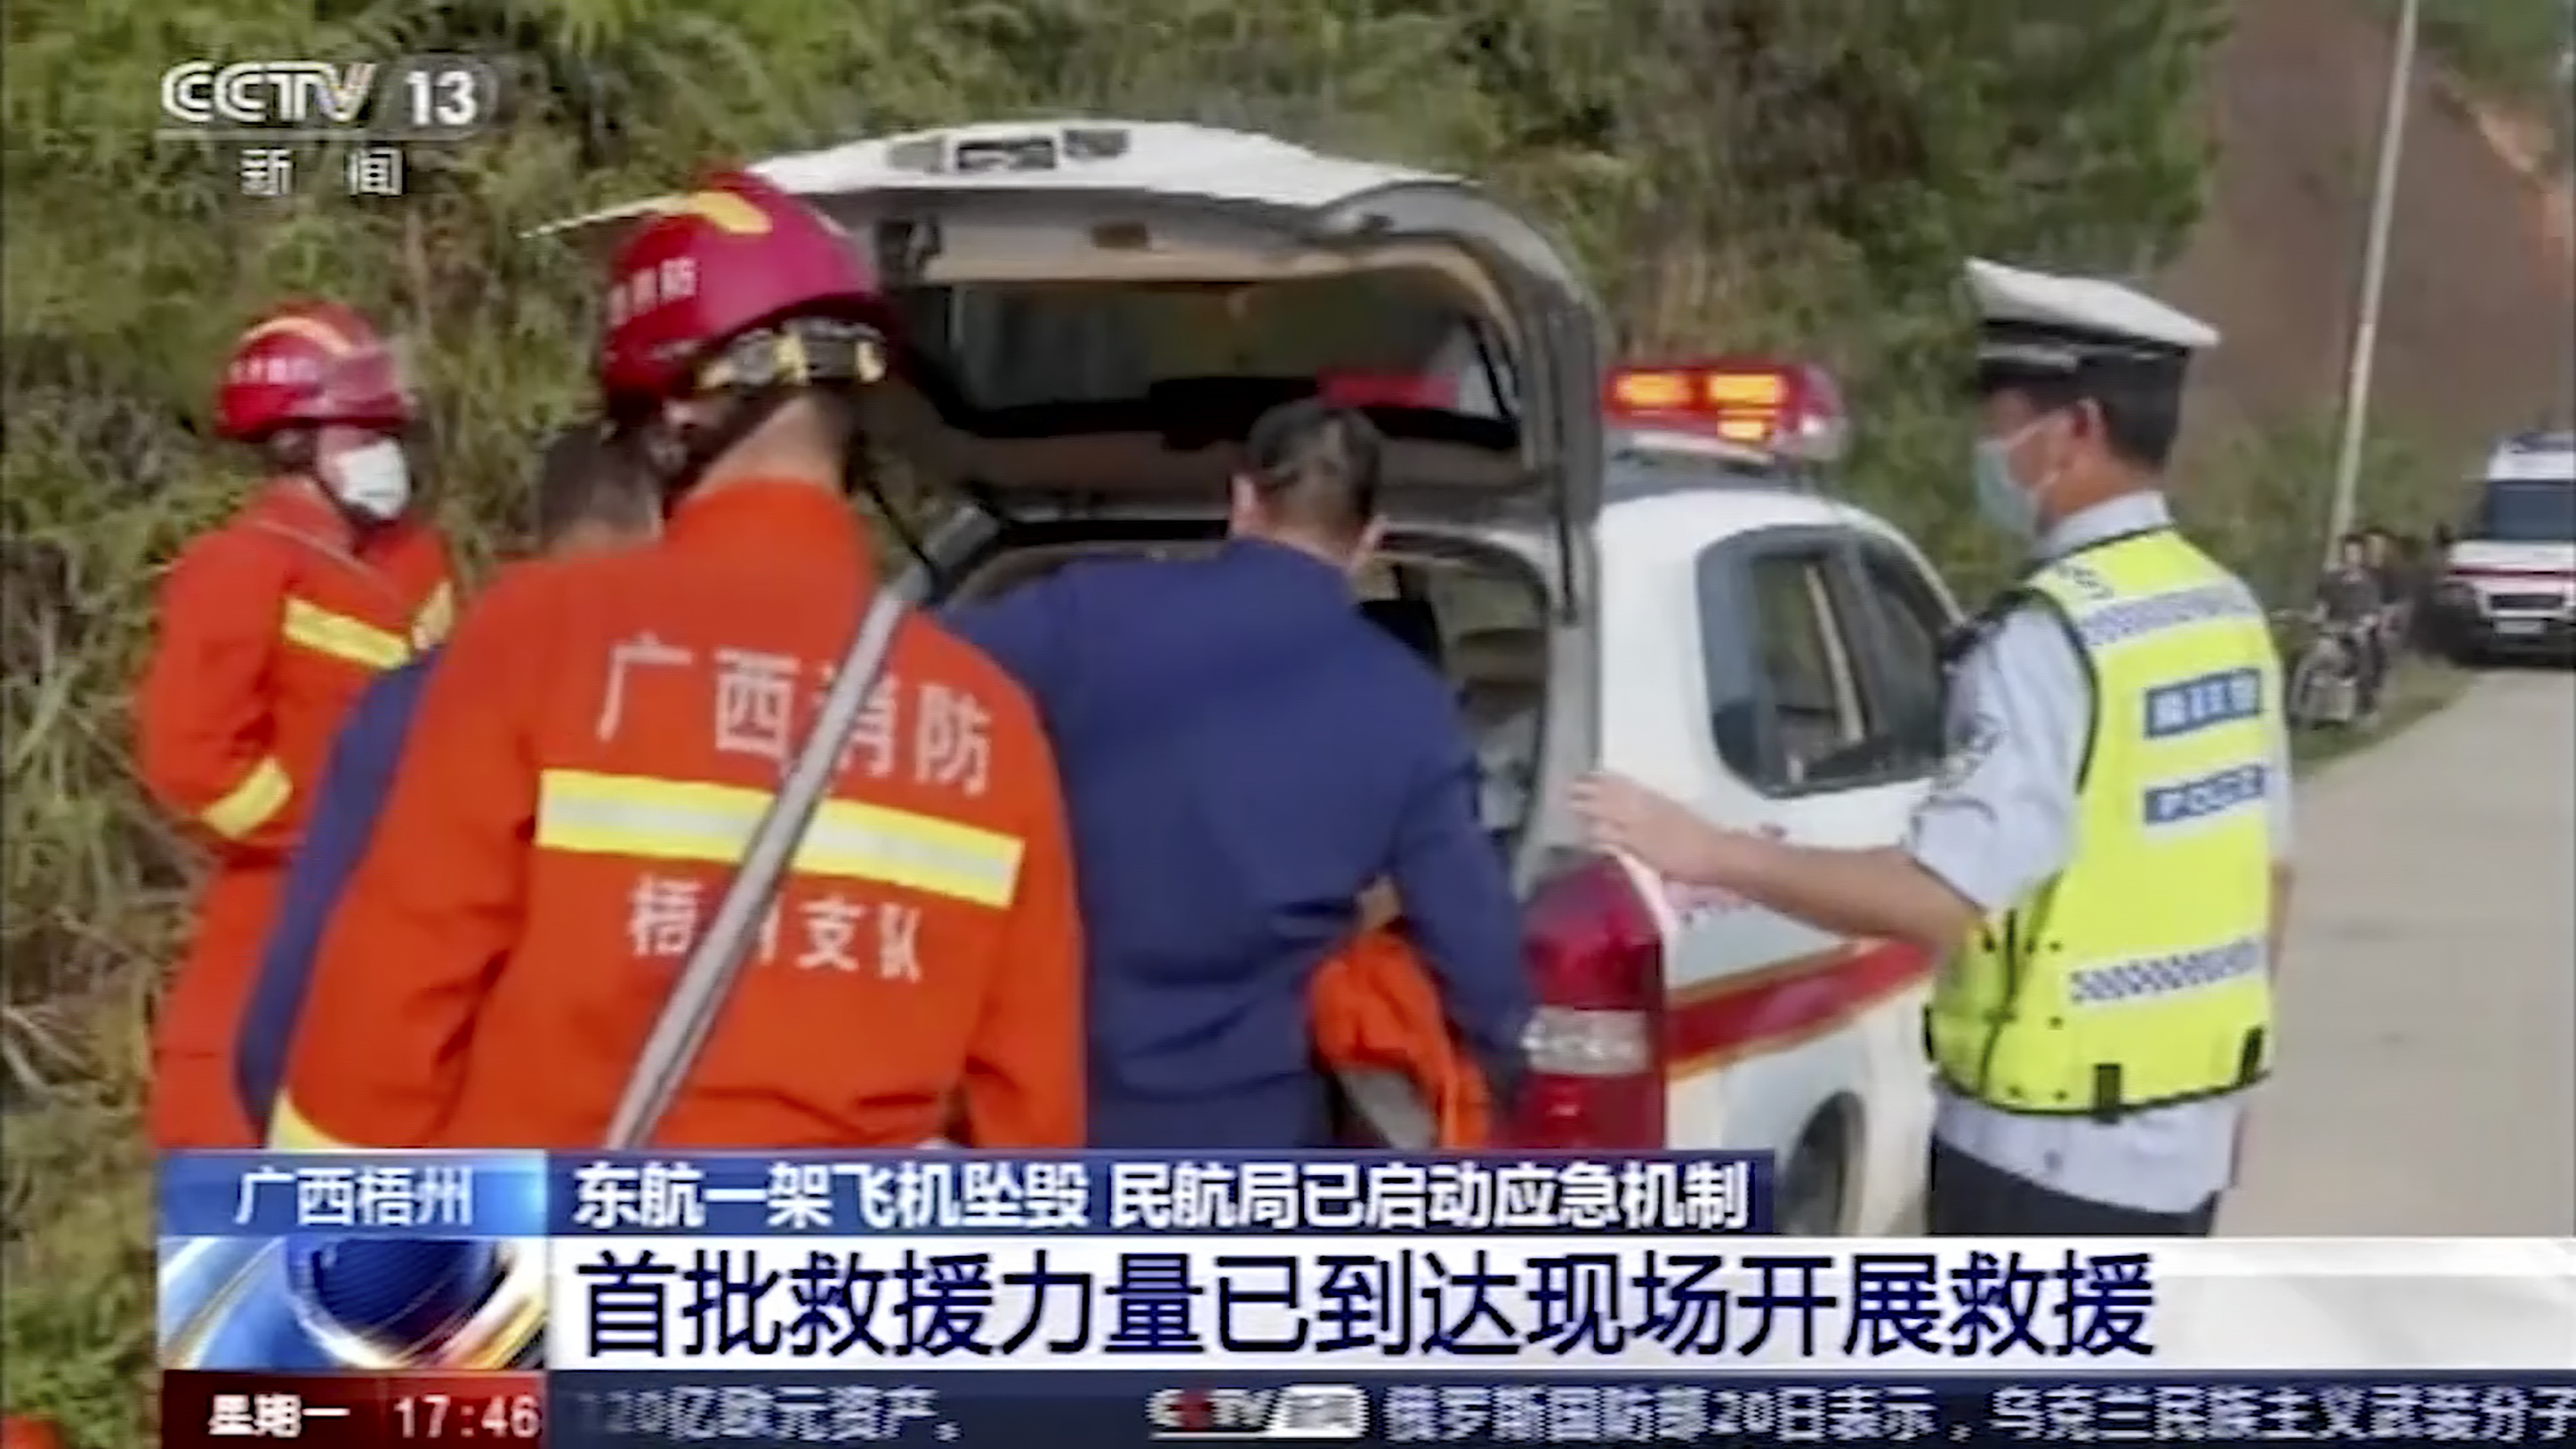 In this image taken from video footage run by China's CCTV, emergency personnel prepare to travel to the site of a plane crash near Wuzhou in southwestern China's Guangxi Zhuang Autonomous Region 